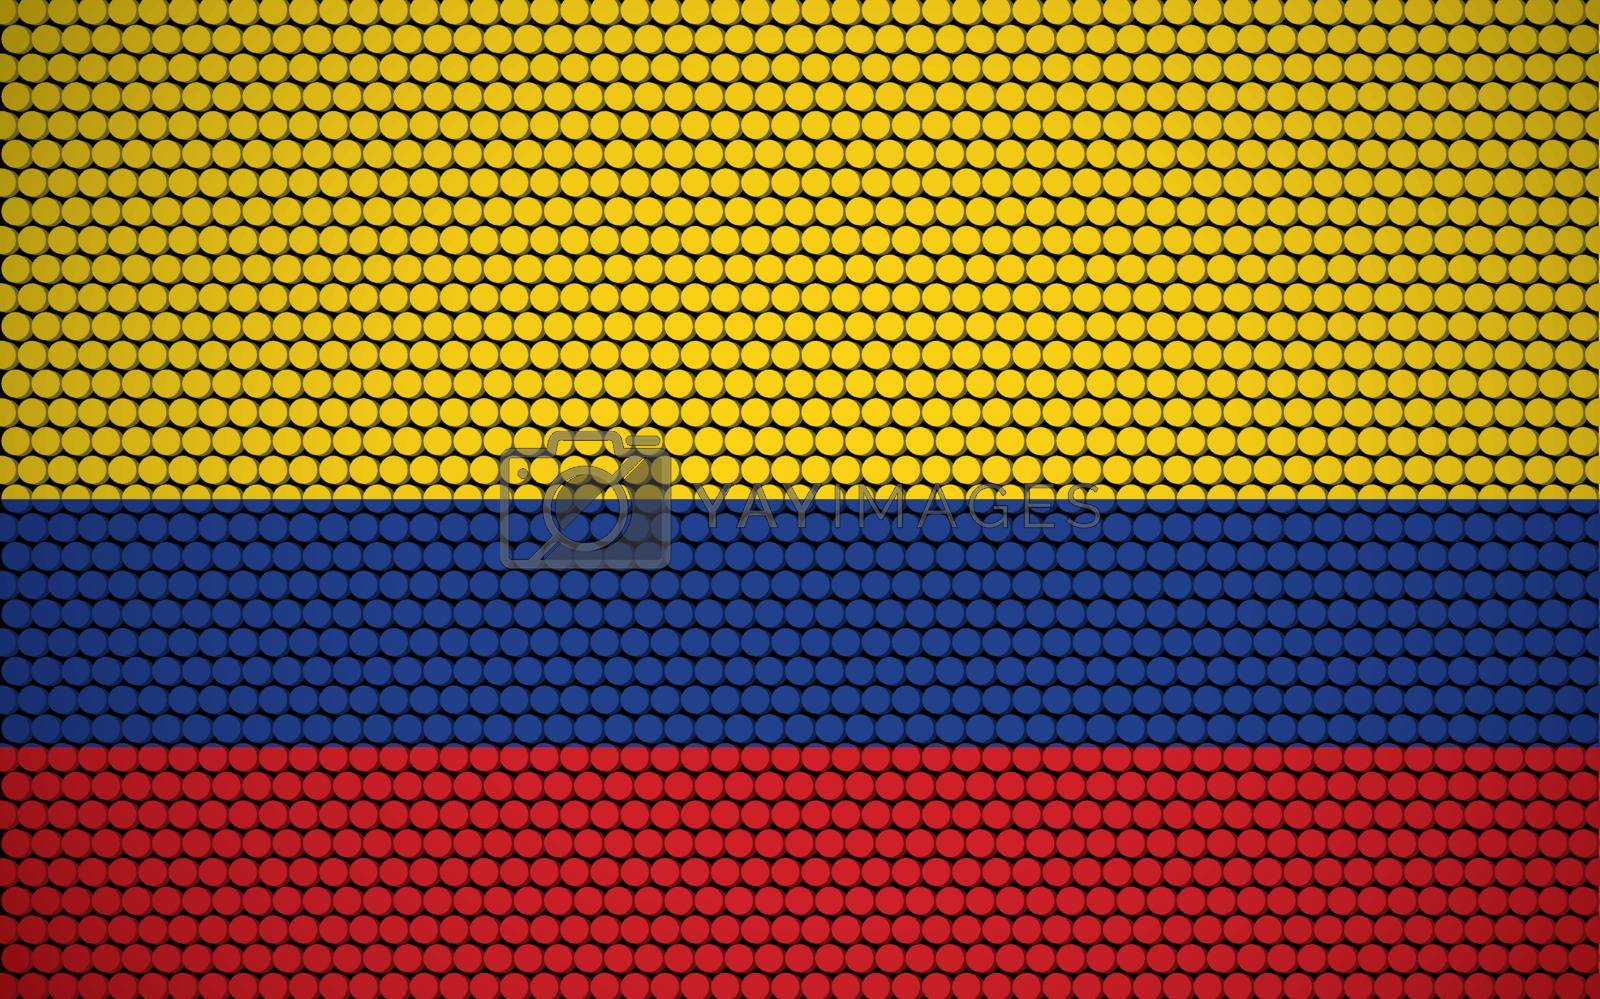 Royalty free image of Abstract flag of Colombia made of circles. Colombian flag designed with colored dots giving it a modern and futuristic abstract look. by Skylark